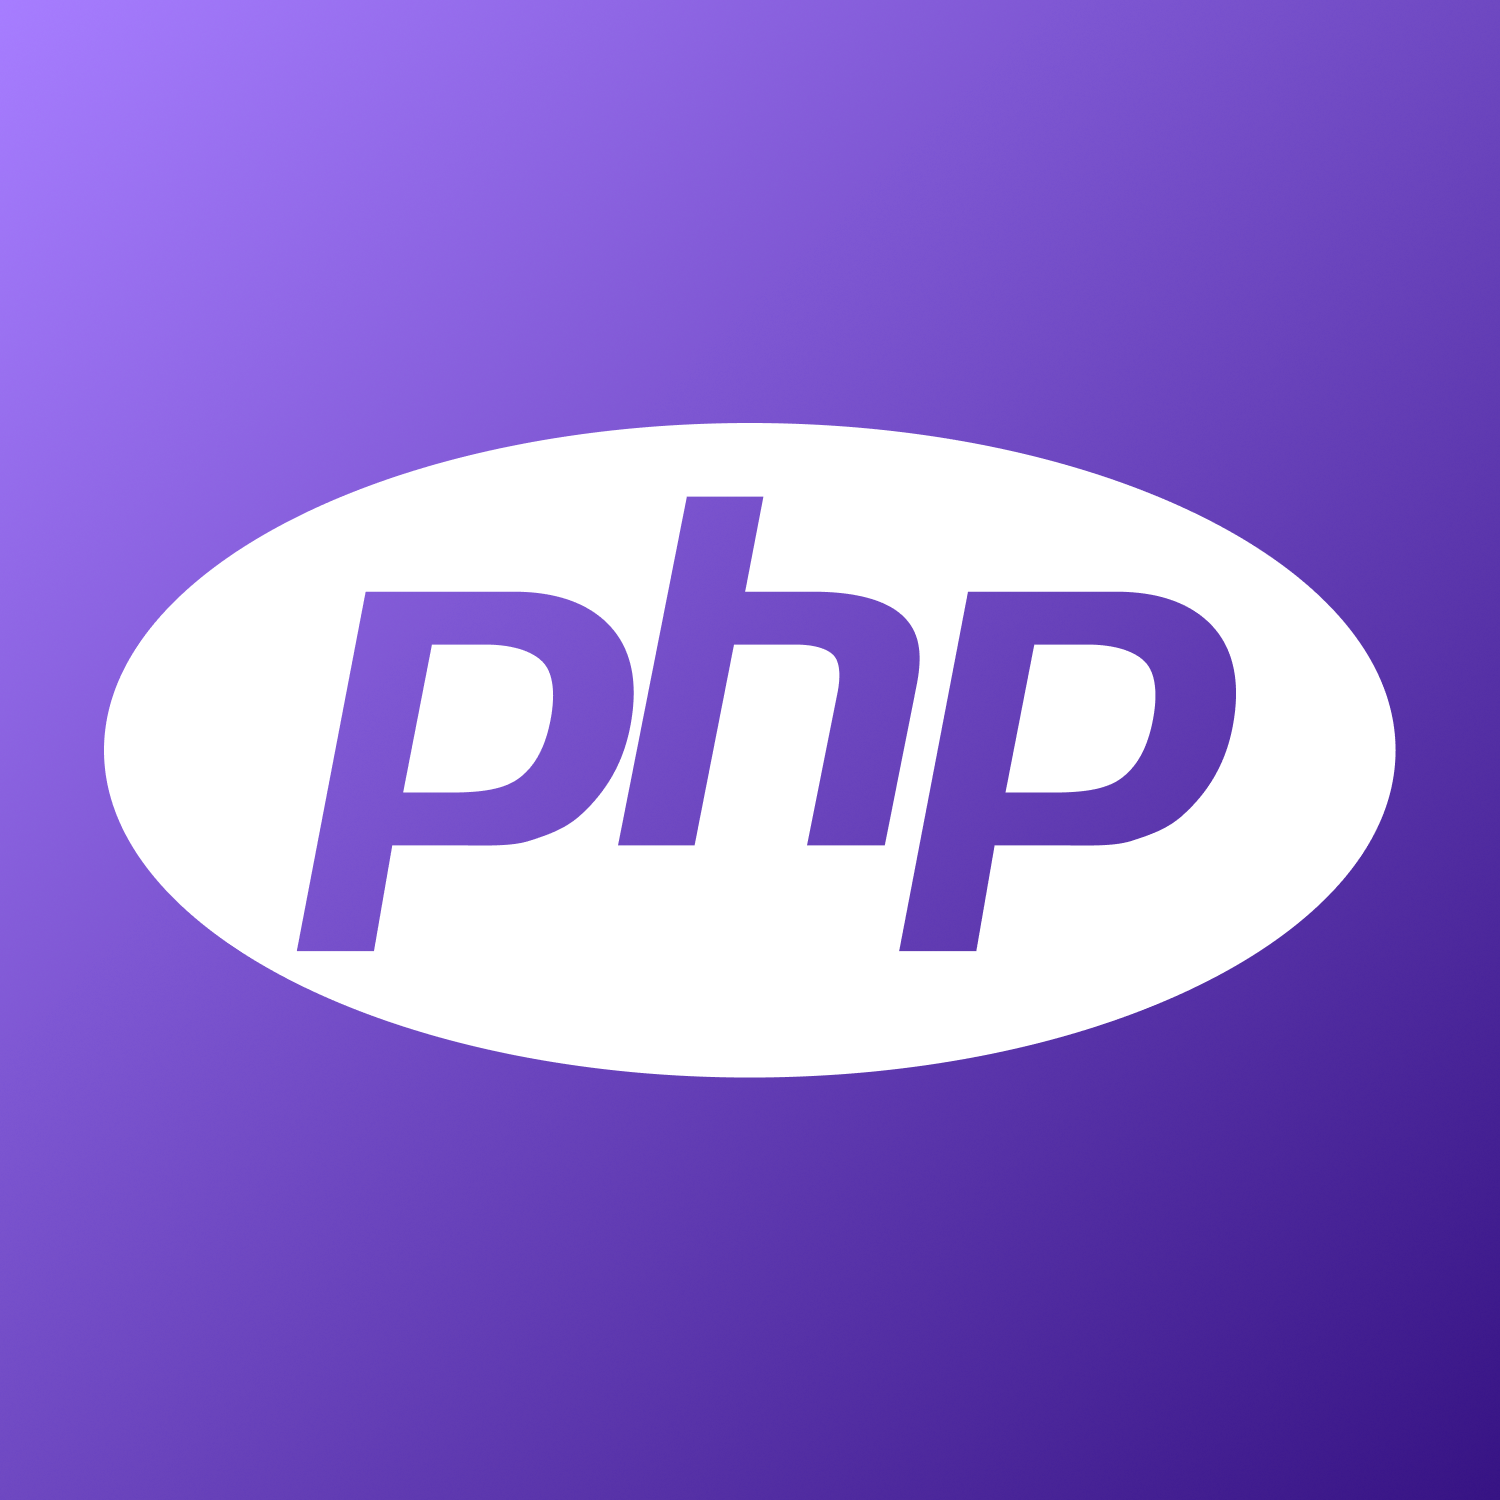 Top 9 Websites To Find High-Quality Remote Freelance PHP Jobs